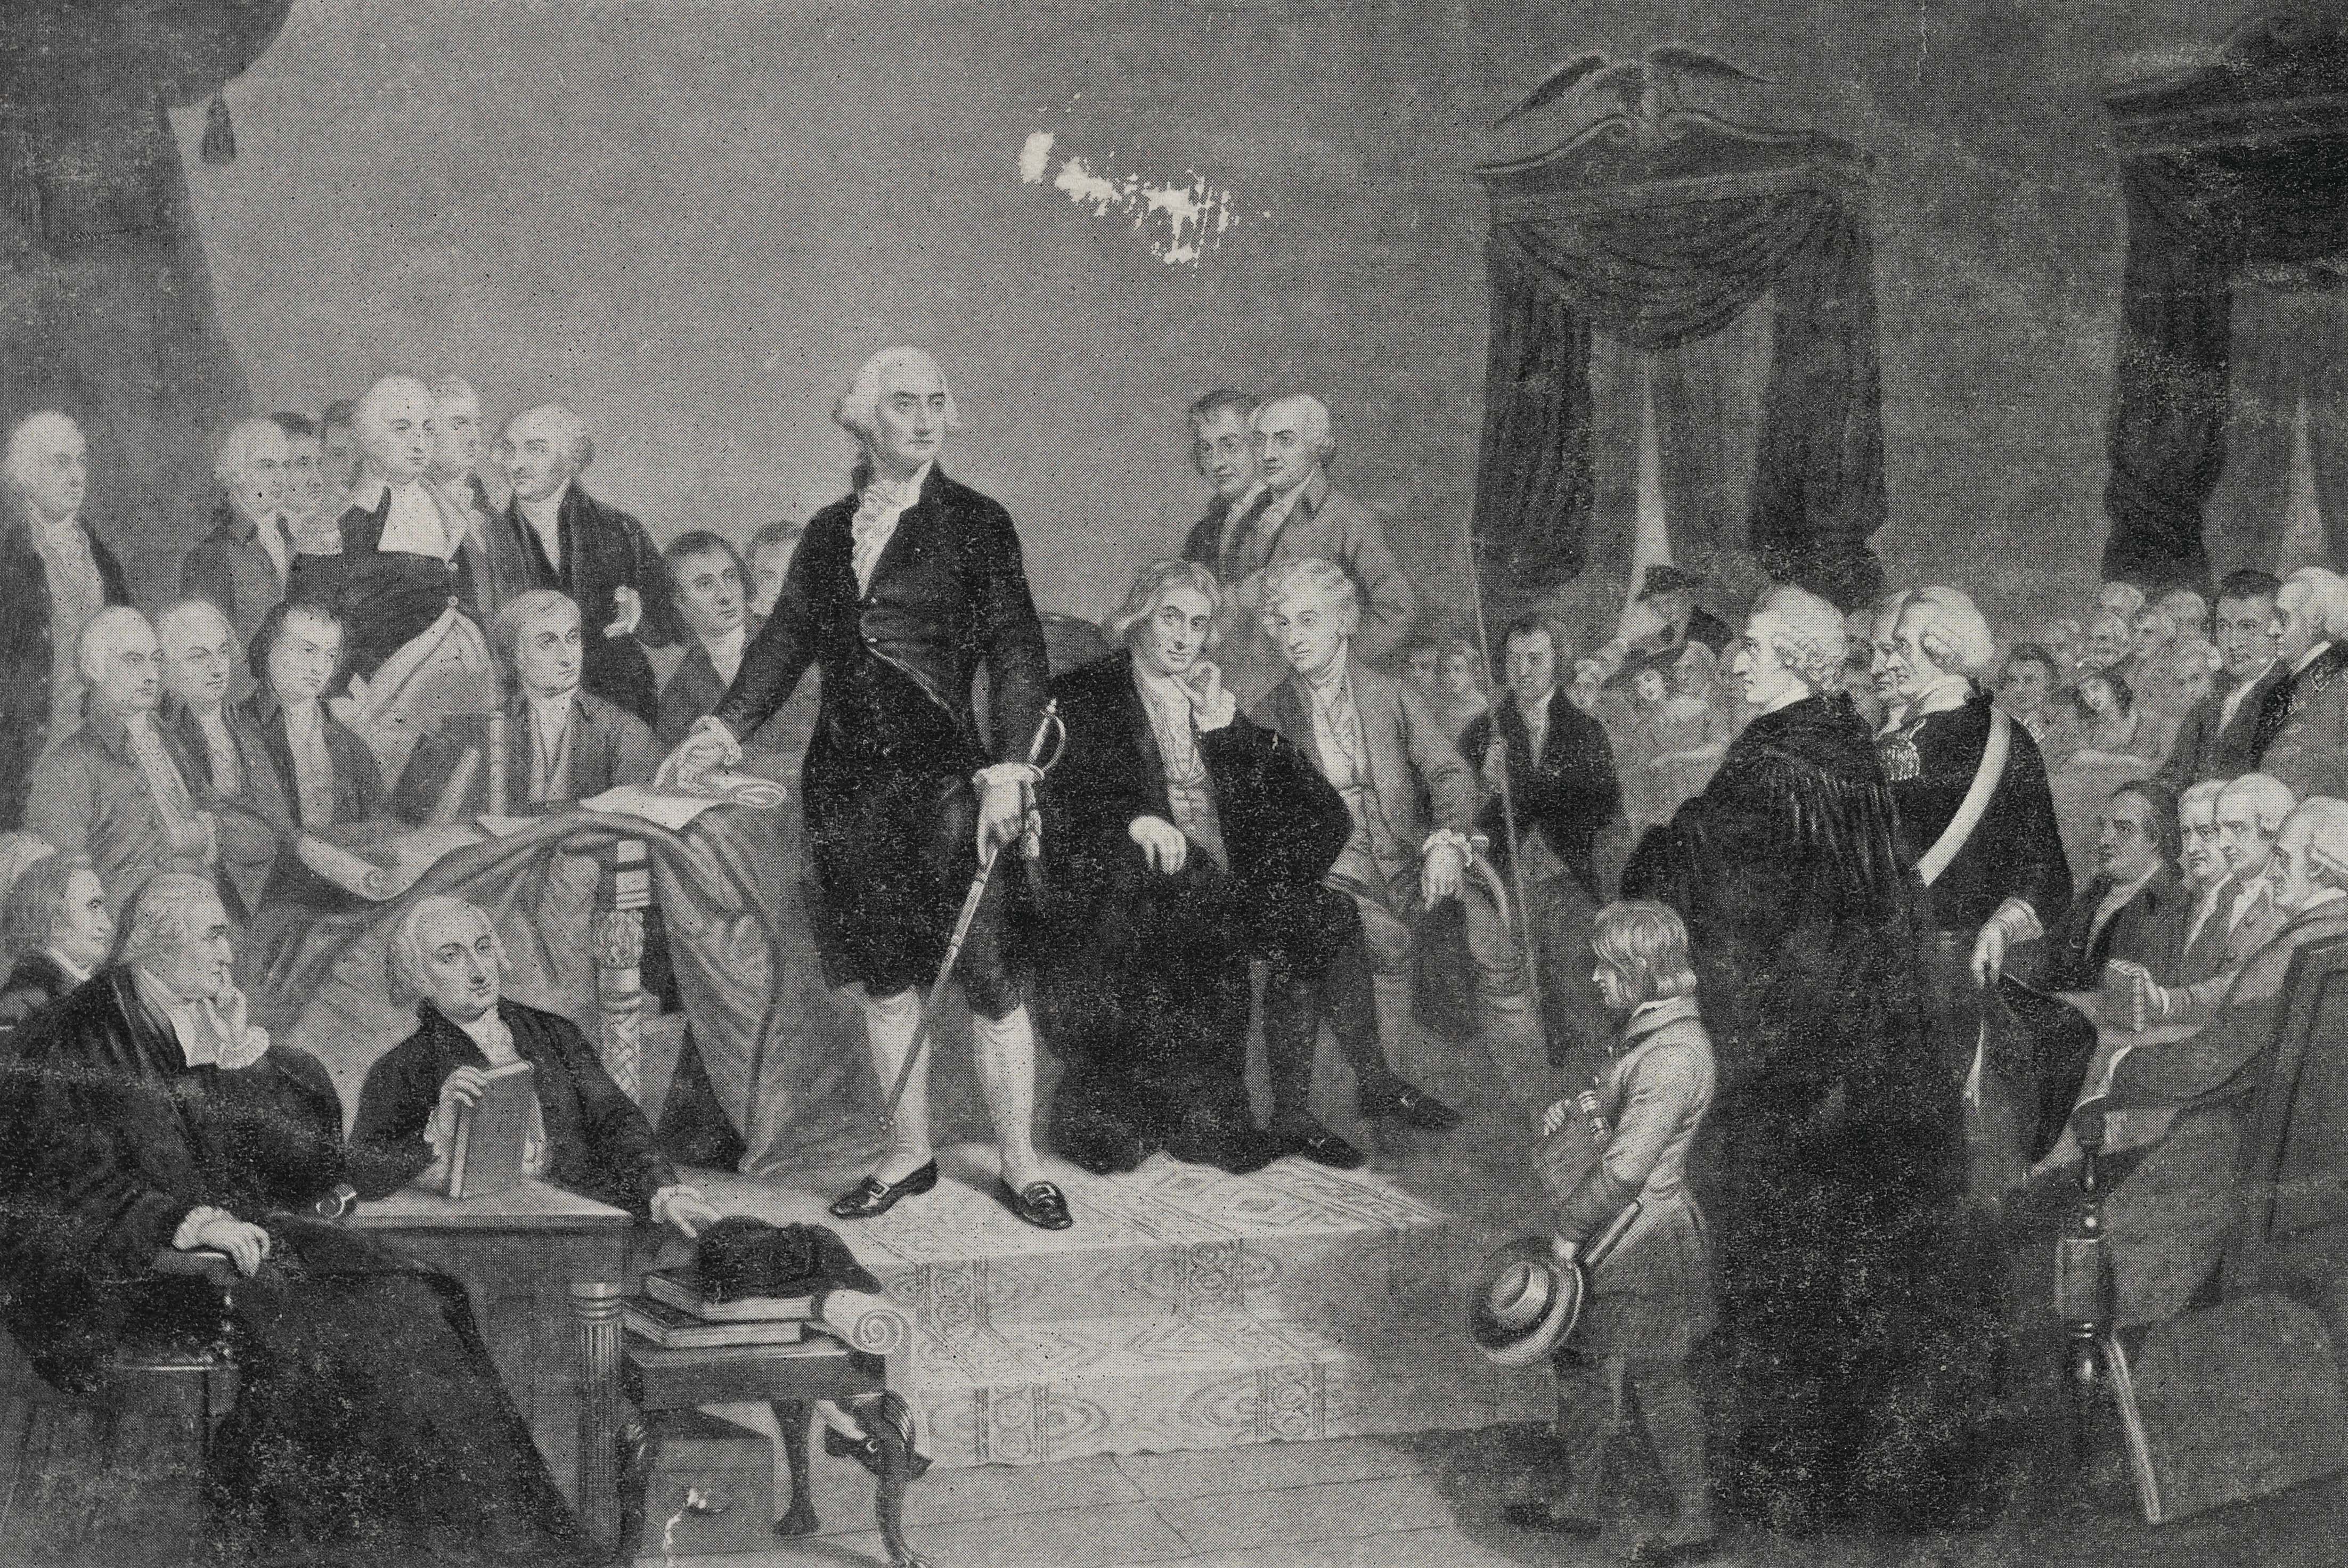 George Washington takes his oath of office during his inauguration